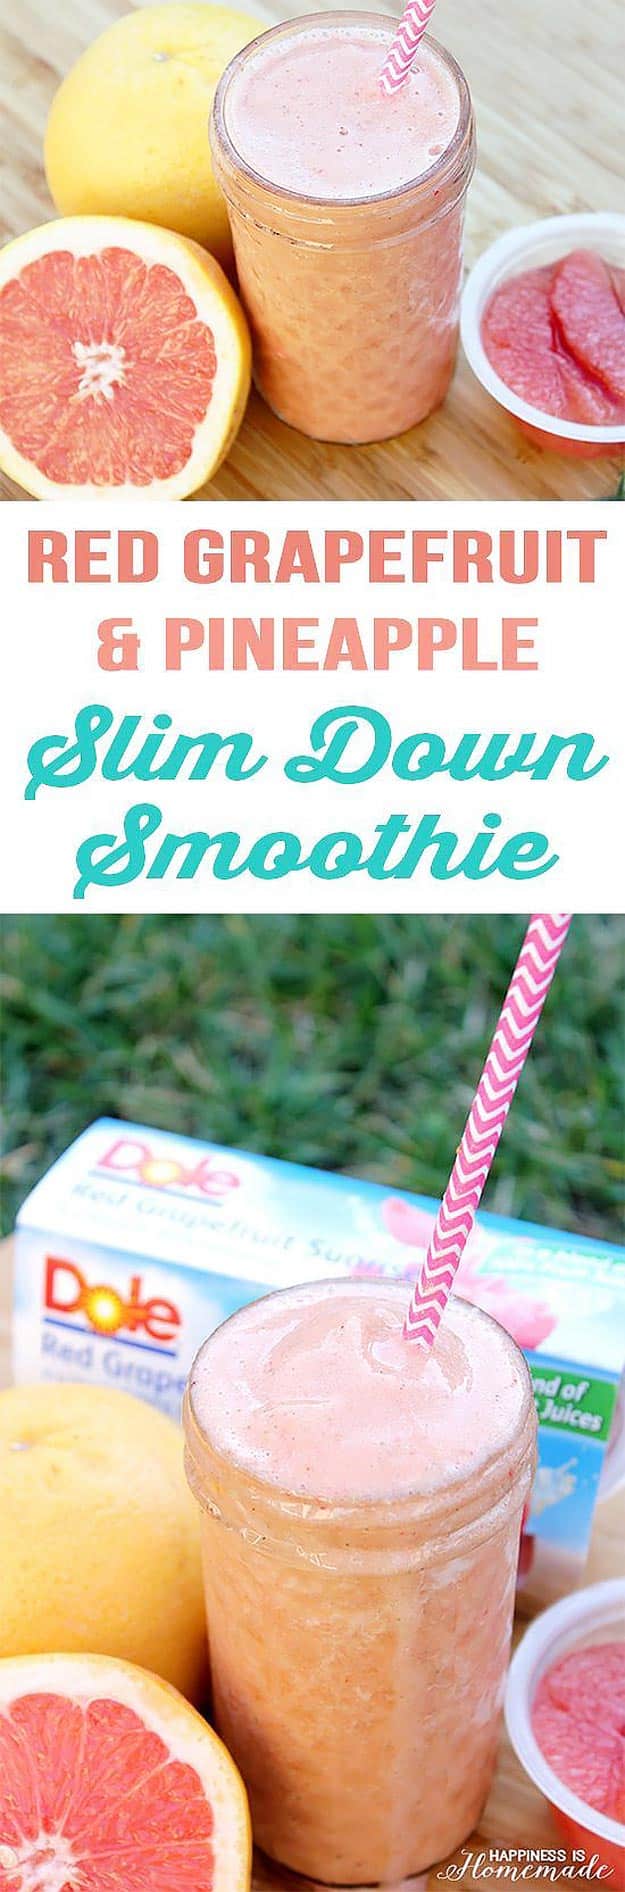 Healthy smoothie recipes and easy ideas perfect for breakfast, energy. Low calorie and high protein recipes for weightloss and to lose weight. Simple homemade recipe ideas that kids love. | Red Grapefruit and Pineapple Slim Down Smoothie #smoothies #recipess